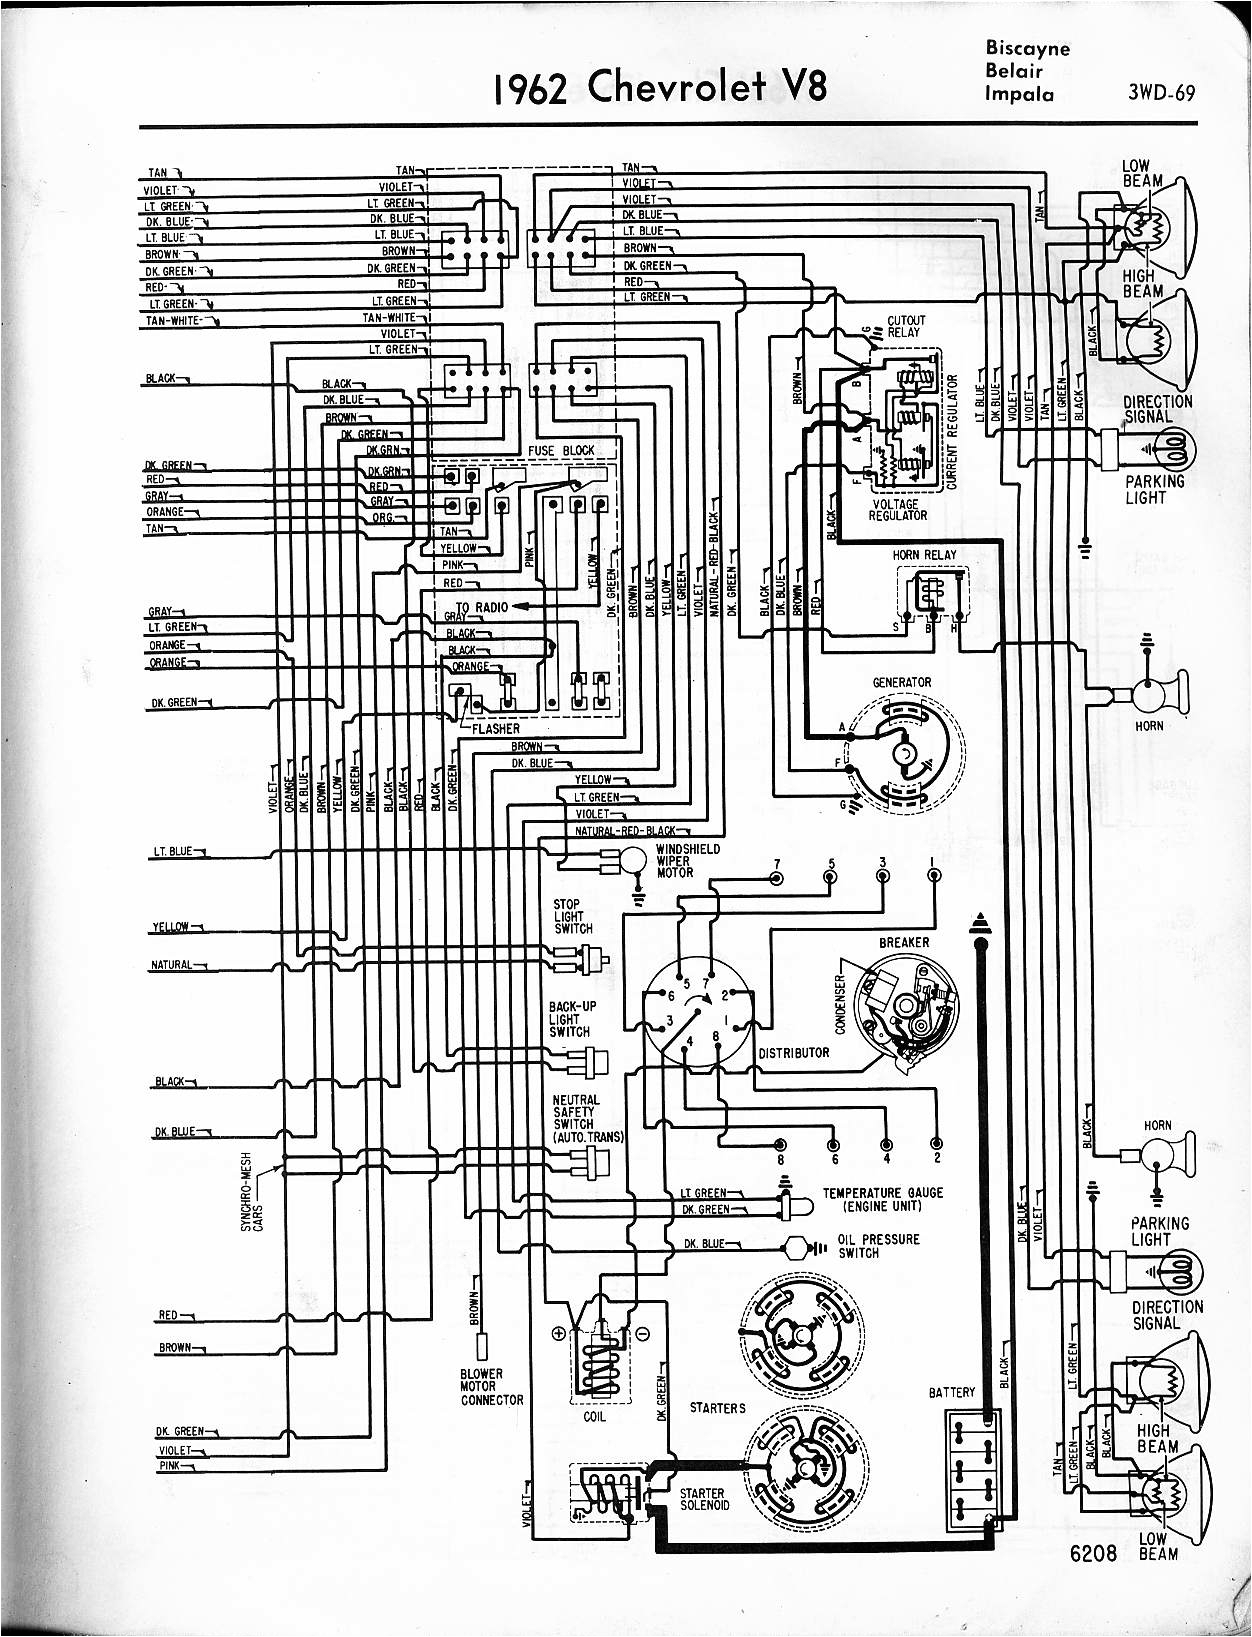 2005 chevy impala wiring diagram download